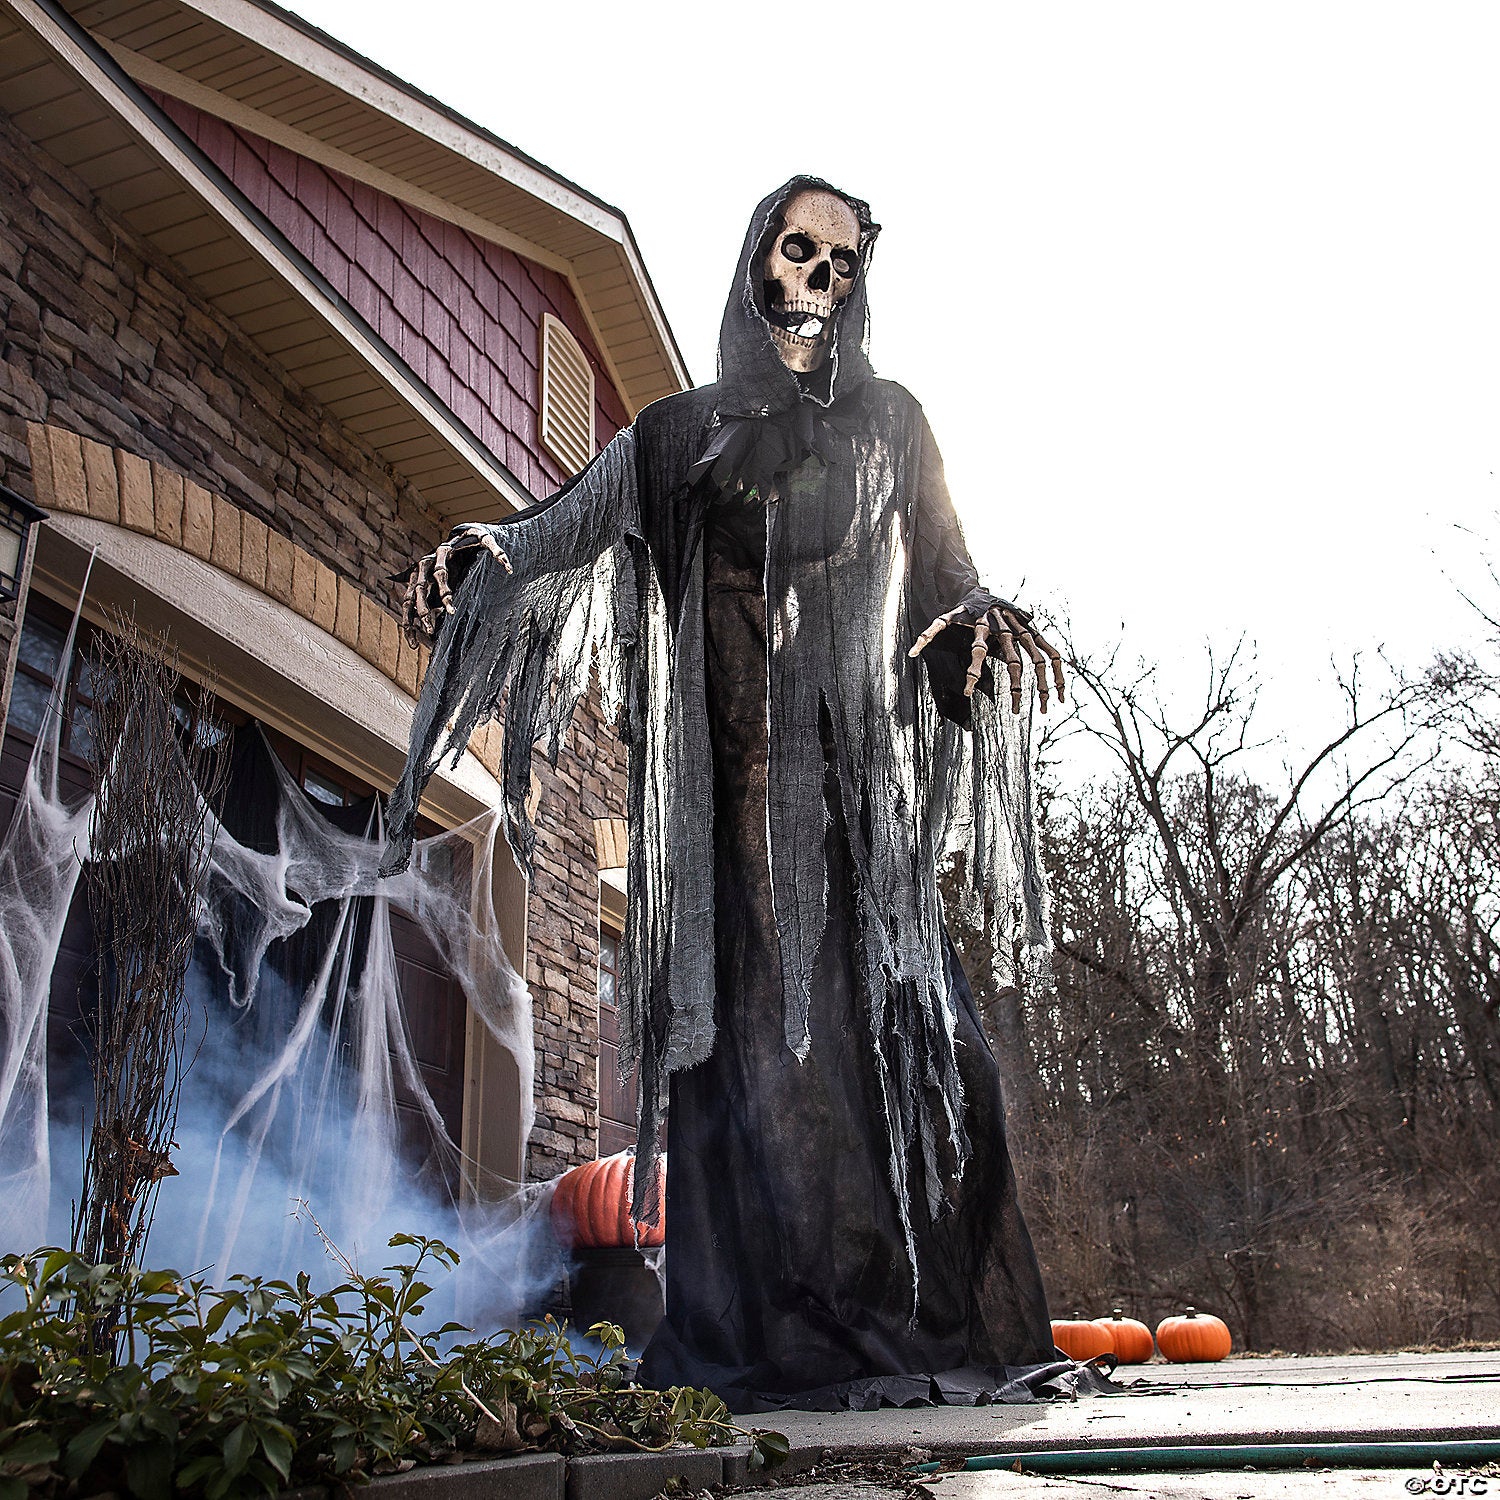 10' Towering Reaper Animated Prop Decoration